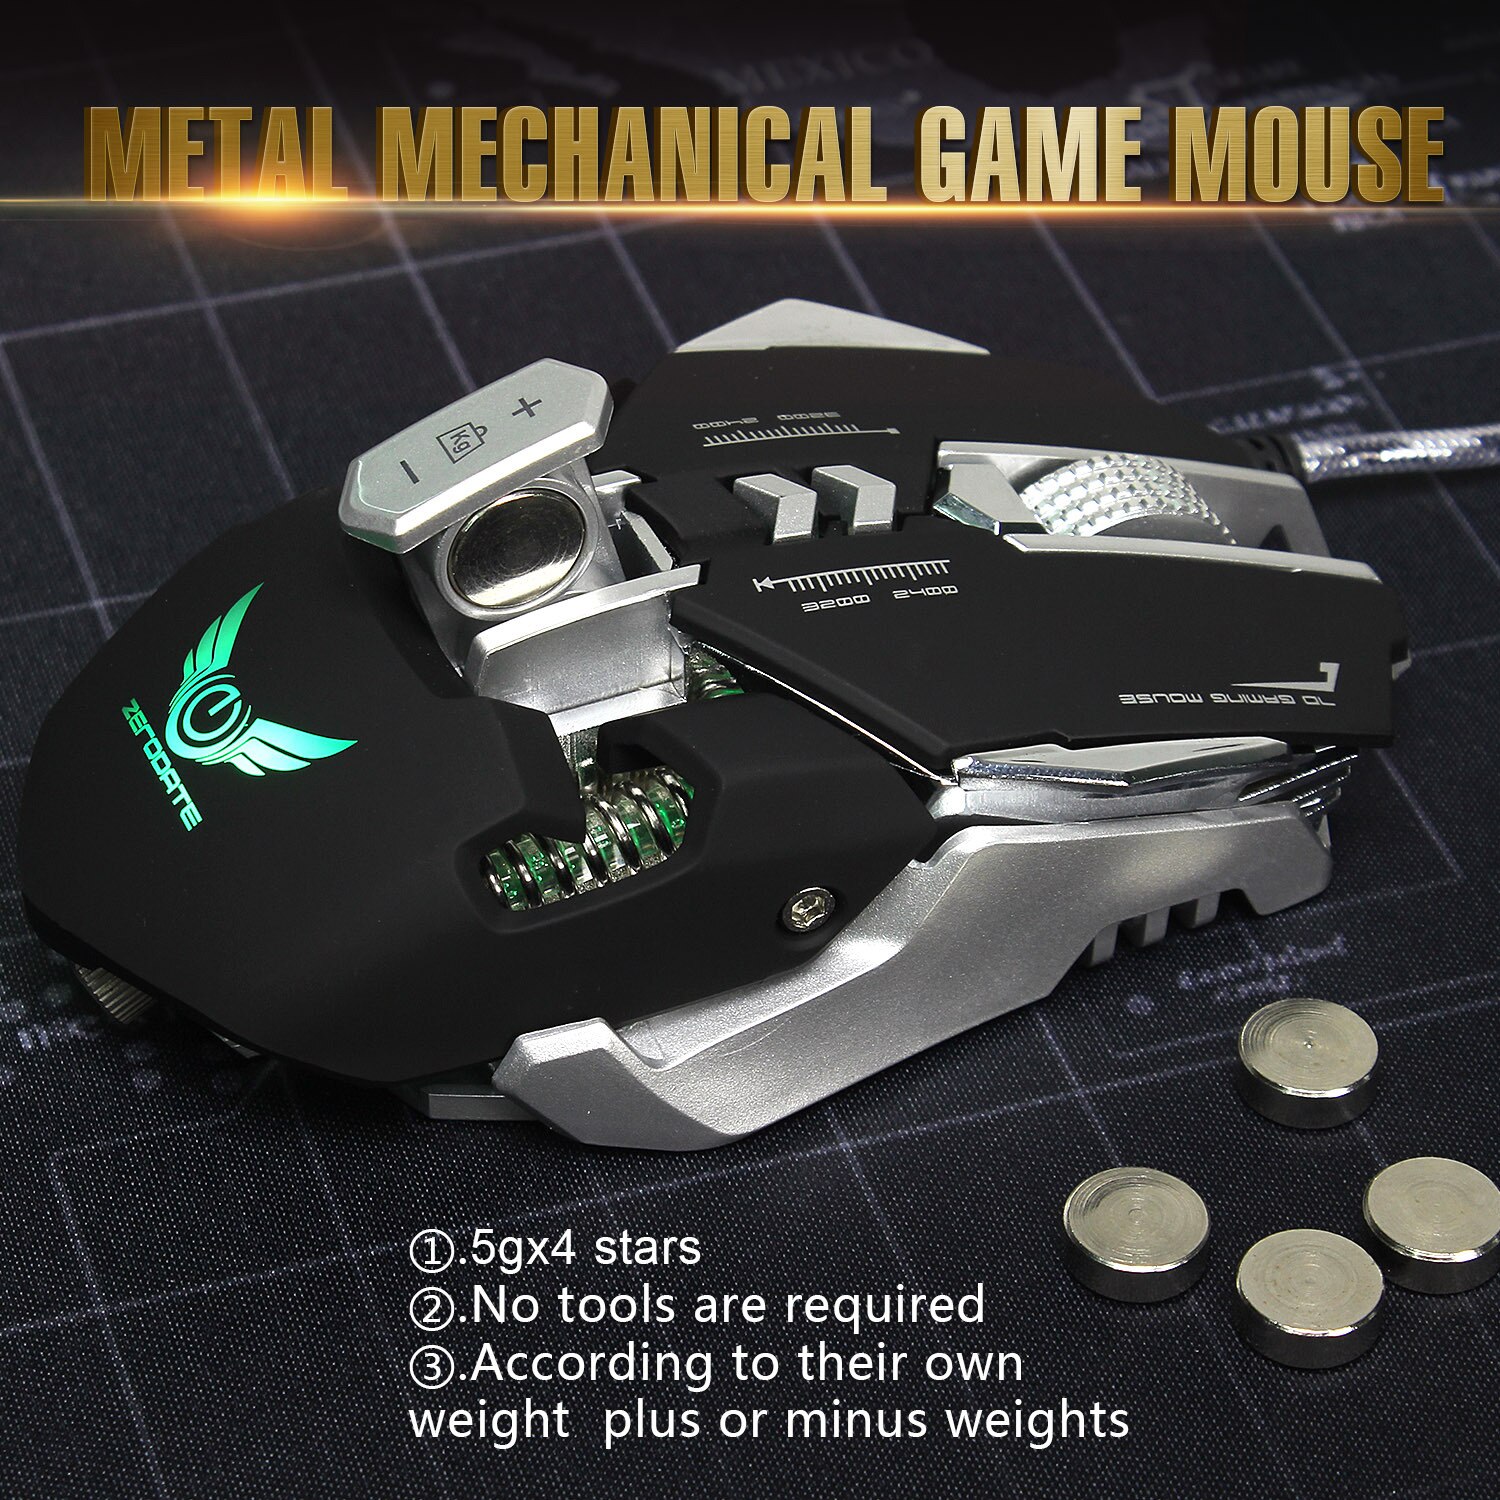 ZERODATE 2019 Professional Optical Programmable Wired LED Gaming Mouse Adjustable 3200 DPI Beetle Creative 3D 7 Button Mice